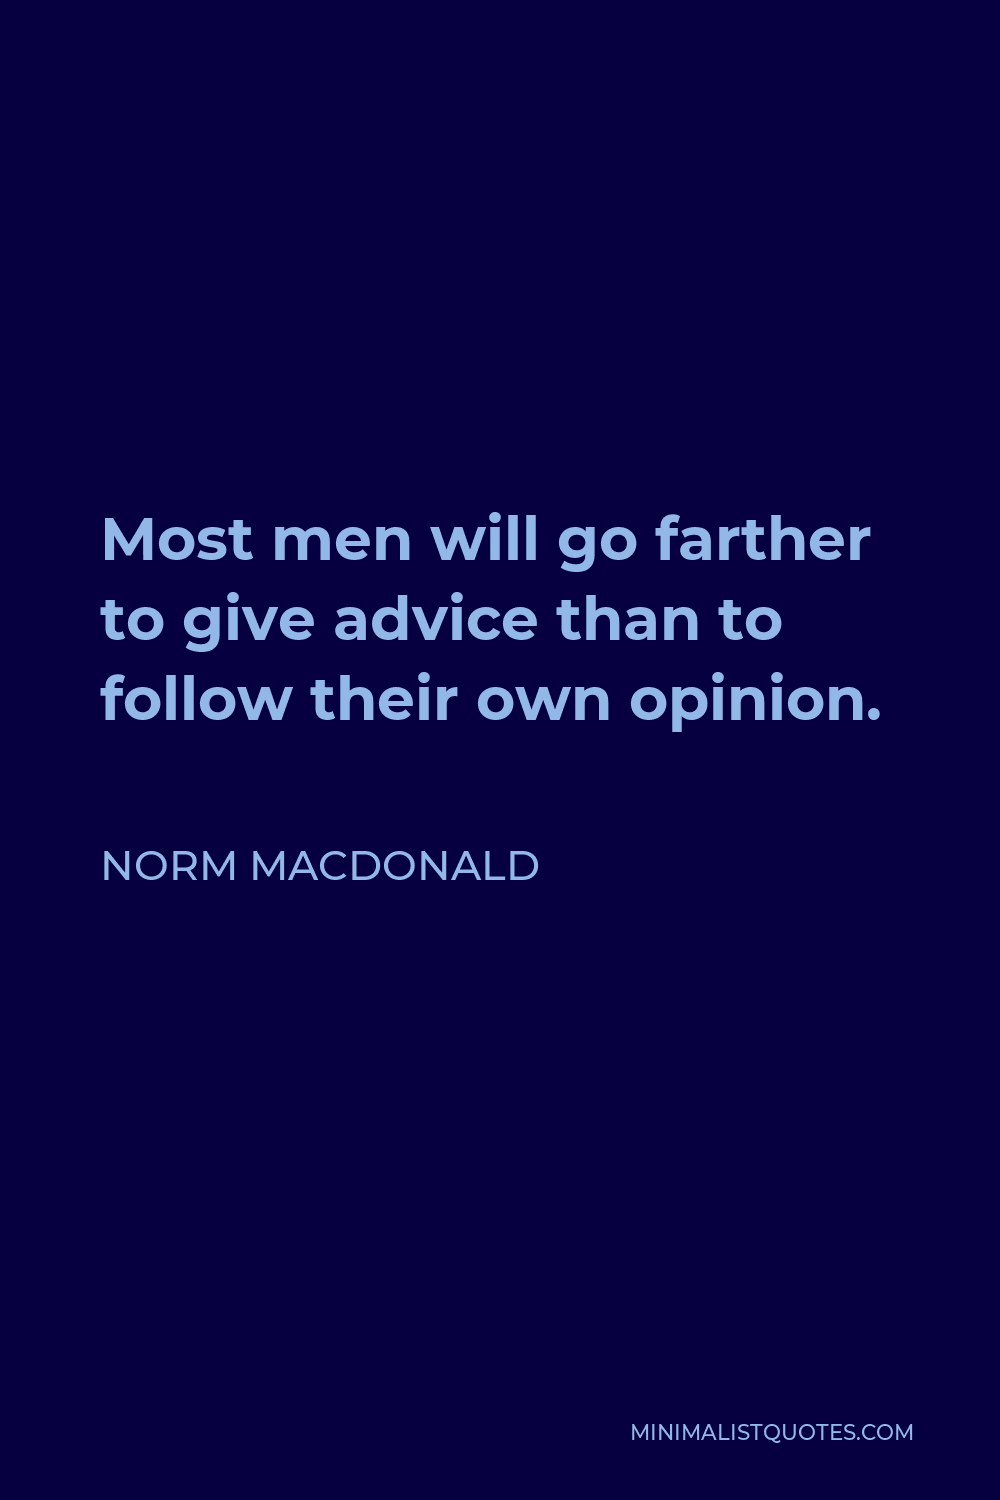 Norm MacDonald Quote - Most men will go farther to give advice than to follow their own opinion.